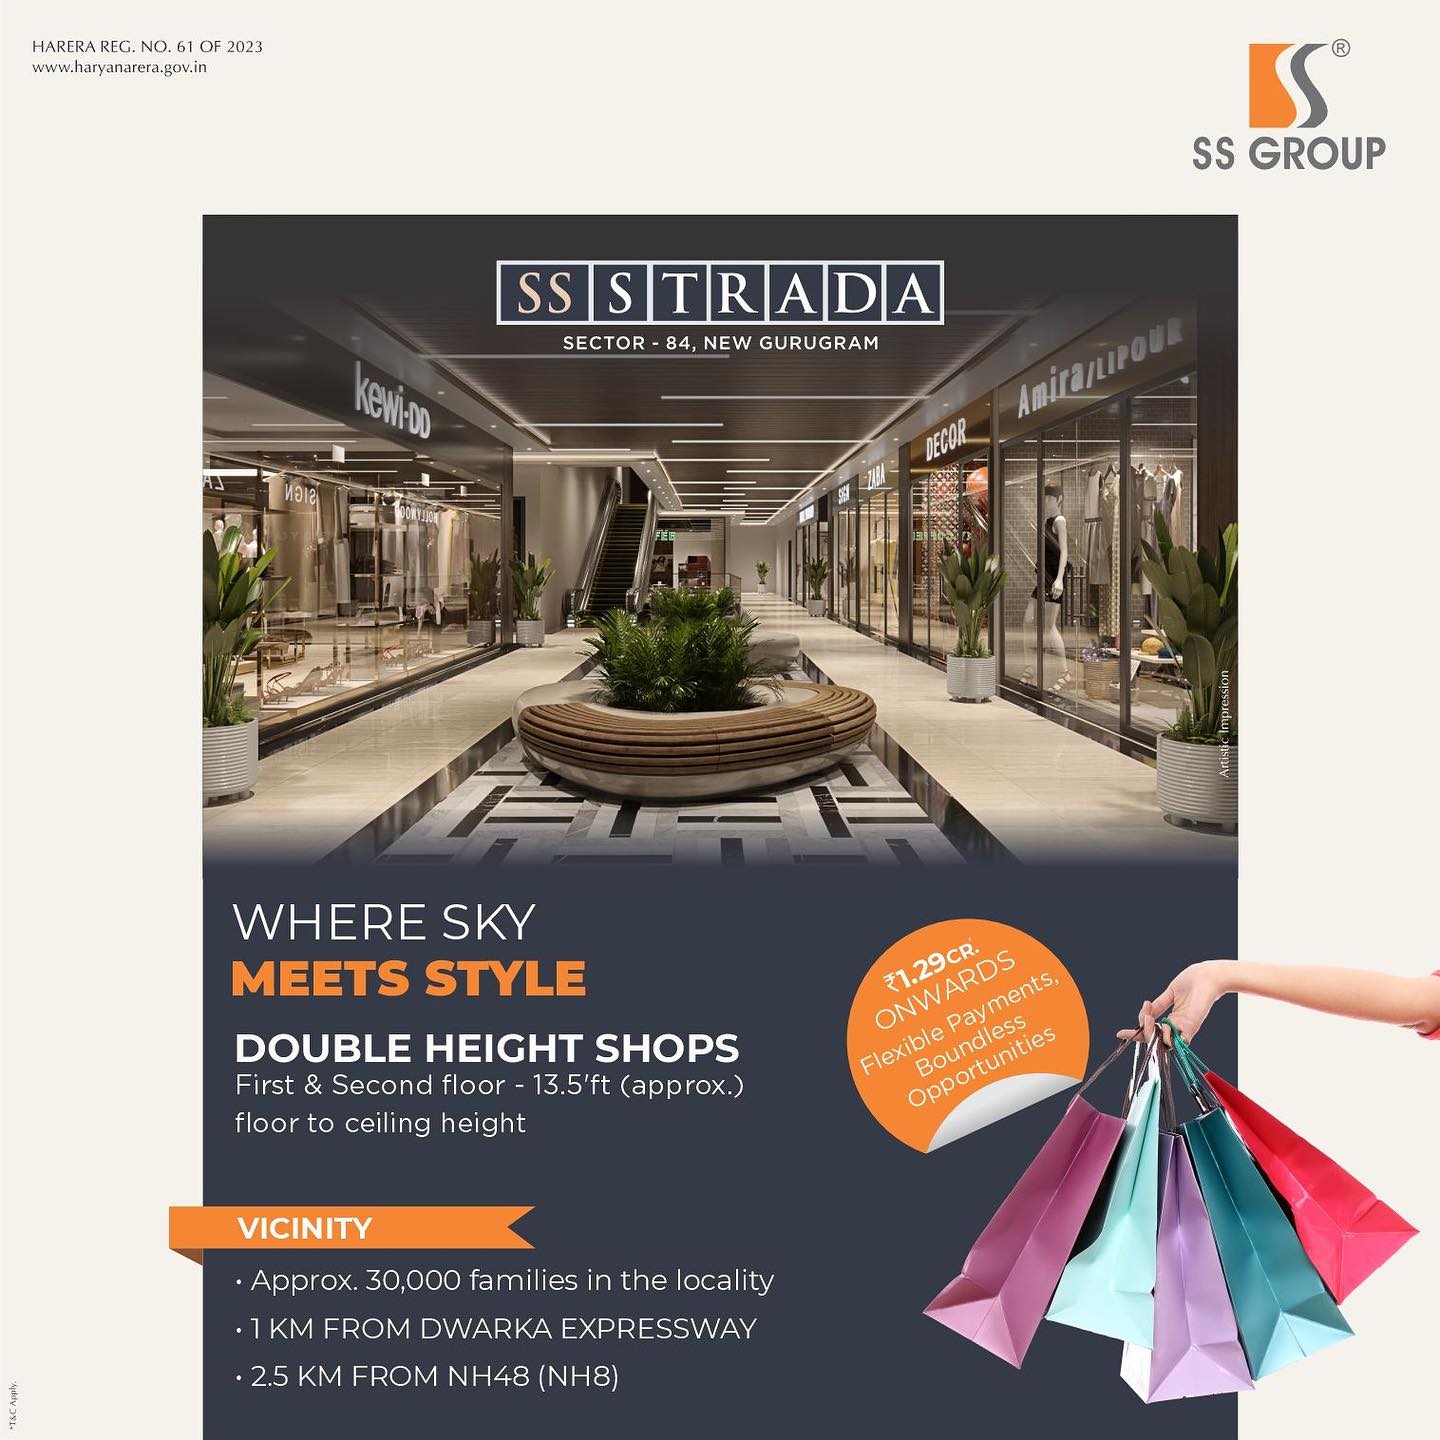 Investment starting from Rs 1.29 Cr onwards at SS Strada in Sector 84, Gurgaon